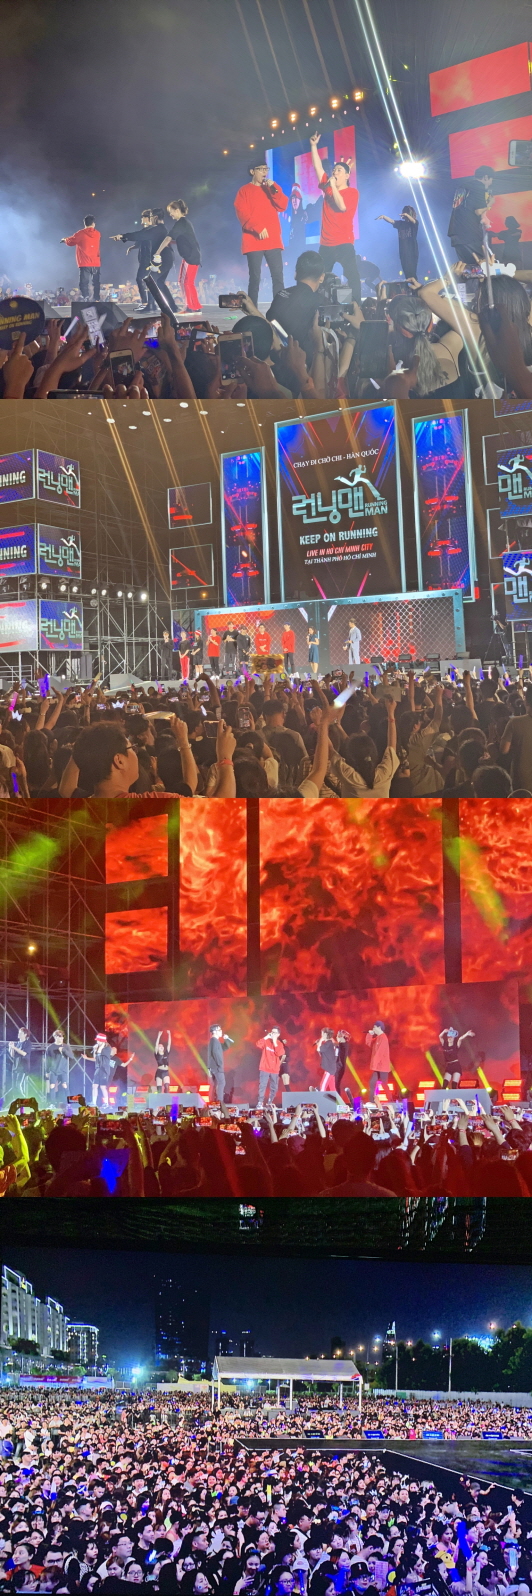 More than 10,000 people gathered at the Vietnam fan meeting of SBS Running Man.A fan meeting of Running Man was held in Ho Chi Minh, Vietnam on the 1st, and the performance was held for about 2 hours and 30 minutes with a full-seat stand at the Ho Chi Minh outdoor performance hall.The show was the first in Southeast Asia to mobilize more than 10,000 spectators and sold 9,000 tickets on the first day of ticket sales.At the same time as the performance began, 5,000 people accessed the official YouTube live channel of Archer Media, the official partner of the Running Man fan meeting event.The performance MC was performed by actor and singer Nguyen Hui, who has appeared in Vietnams Running Man this year and is gaining great popularity.Running Man members were worried about fans standing for a long time and watching the performance, and performed a concert in hot weather to repay the fans Fly Me to Polaris and cheers.We are preparing for the Asia Fan Meeting Tour to mark the 10th anniversary of Running Man next year, and the Fly Me to Polaris from Vietnamese fans has been a great help, said Yoo Won-ri, a producer of SBS Global Contents Biz Team.I think it has served as a driving force for the fan meeting tour next year. The 2019 Running Man Overseas Fan Meeting Tour will be held in Hong Kong, Jakarta and Ho Chi Minh.